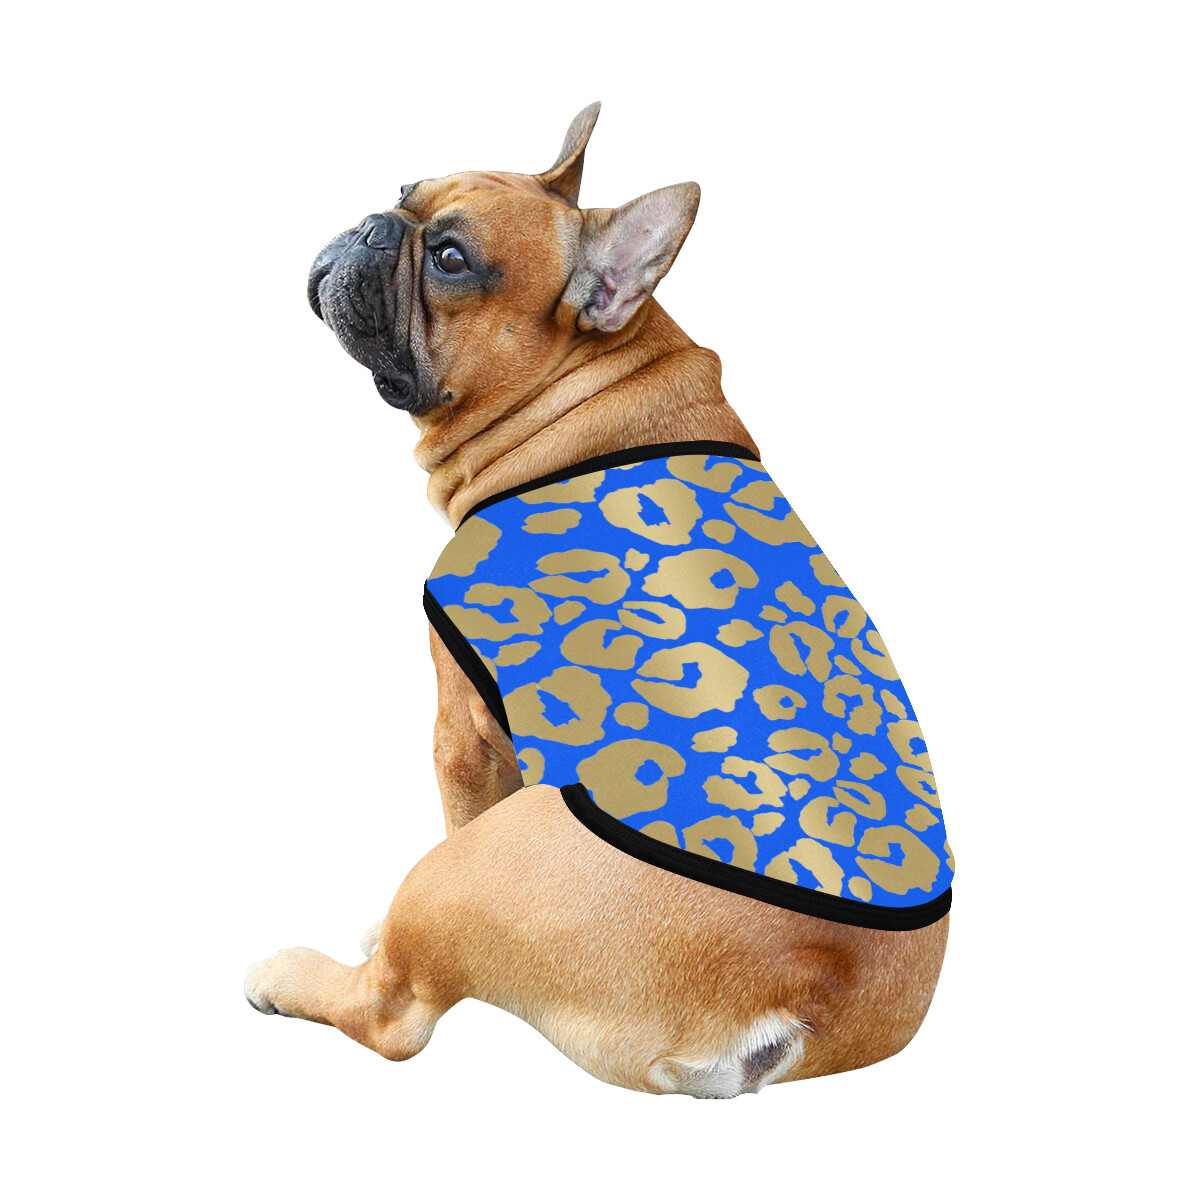 🐕 Leopard print Dog shirt, Dog Tank Top, Dog t-shirt, Dog clothes, Gifts, front back print, 7 sizes XS to 3XL, dog gifts, gold and blue